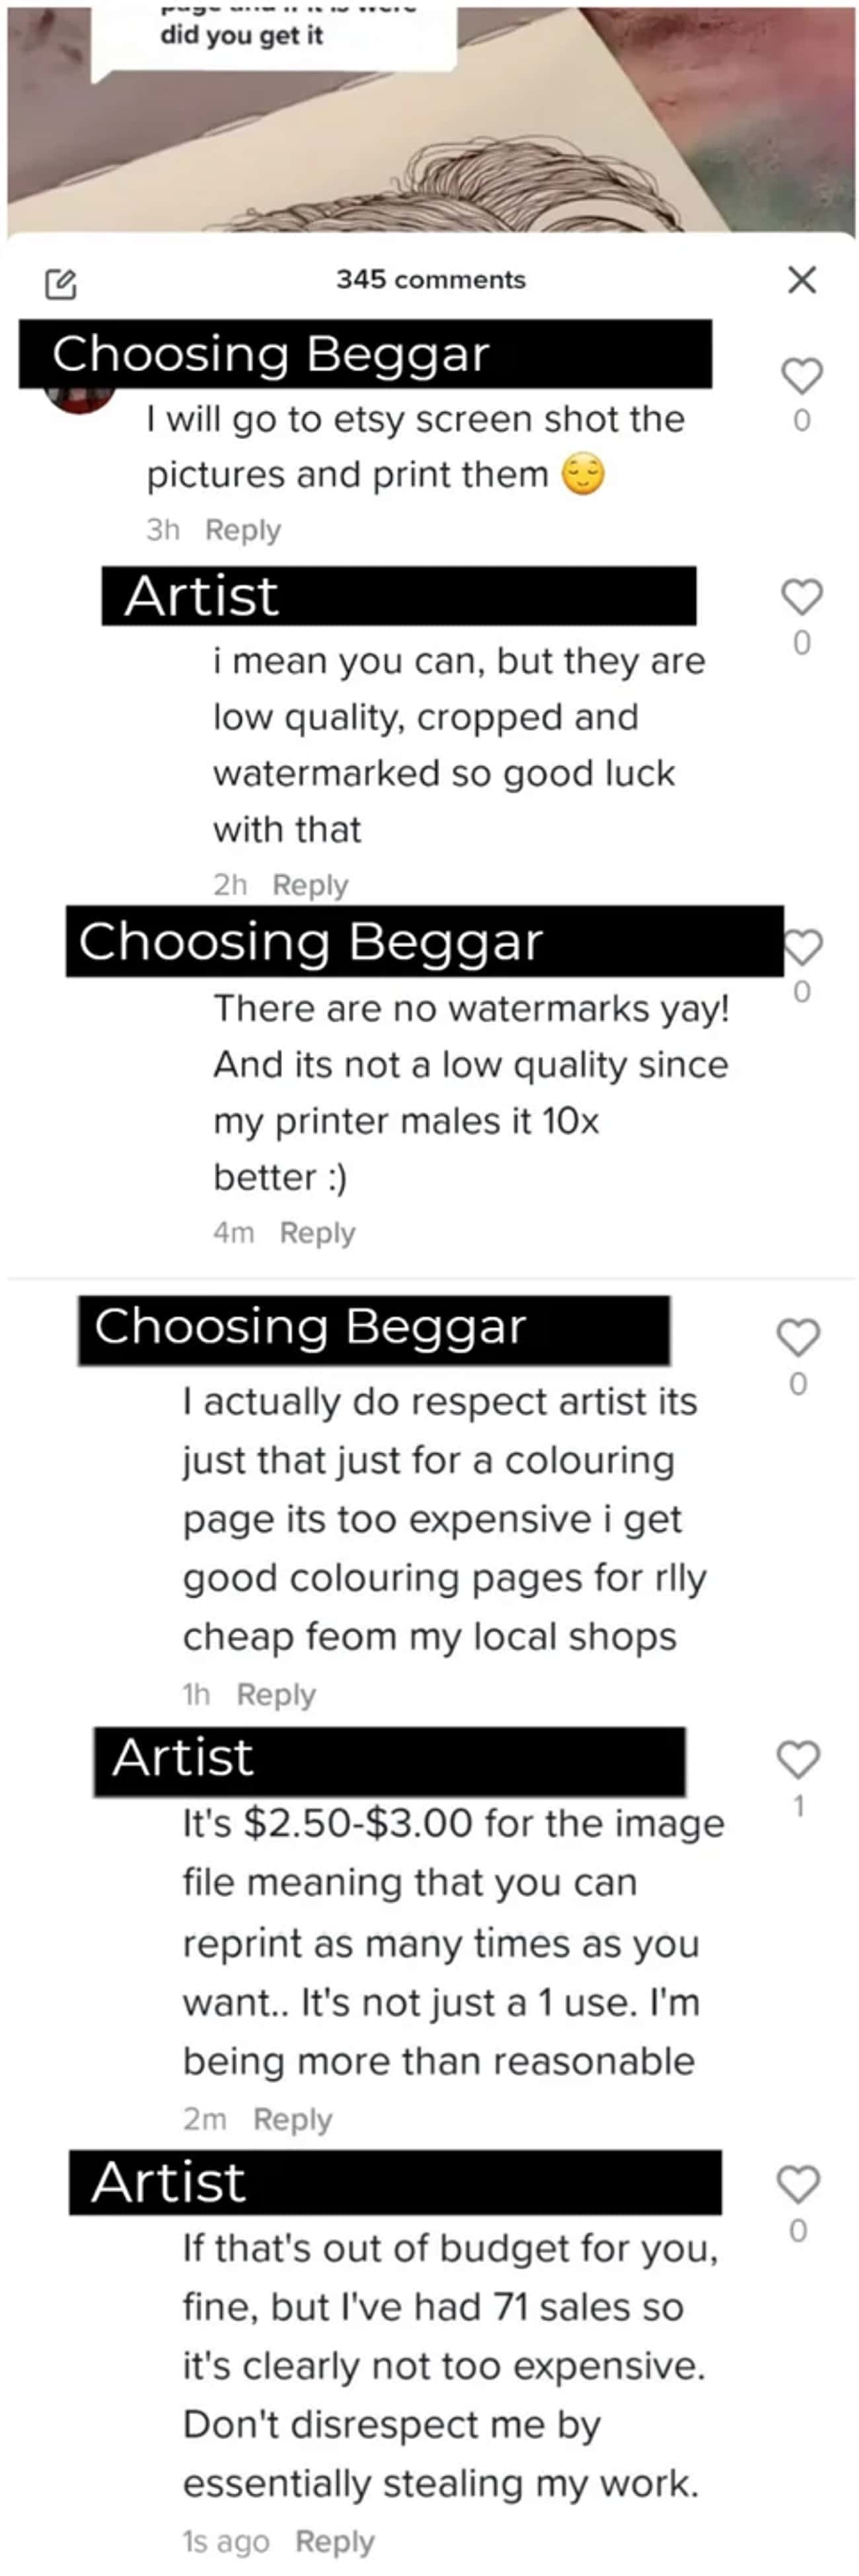 Choosing Beggar Shamelessly States That They Will Steal Art